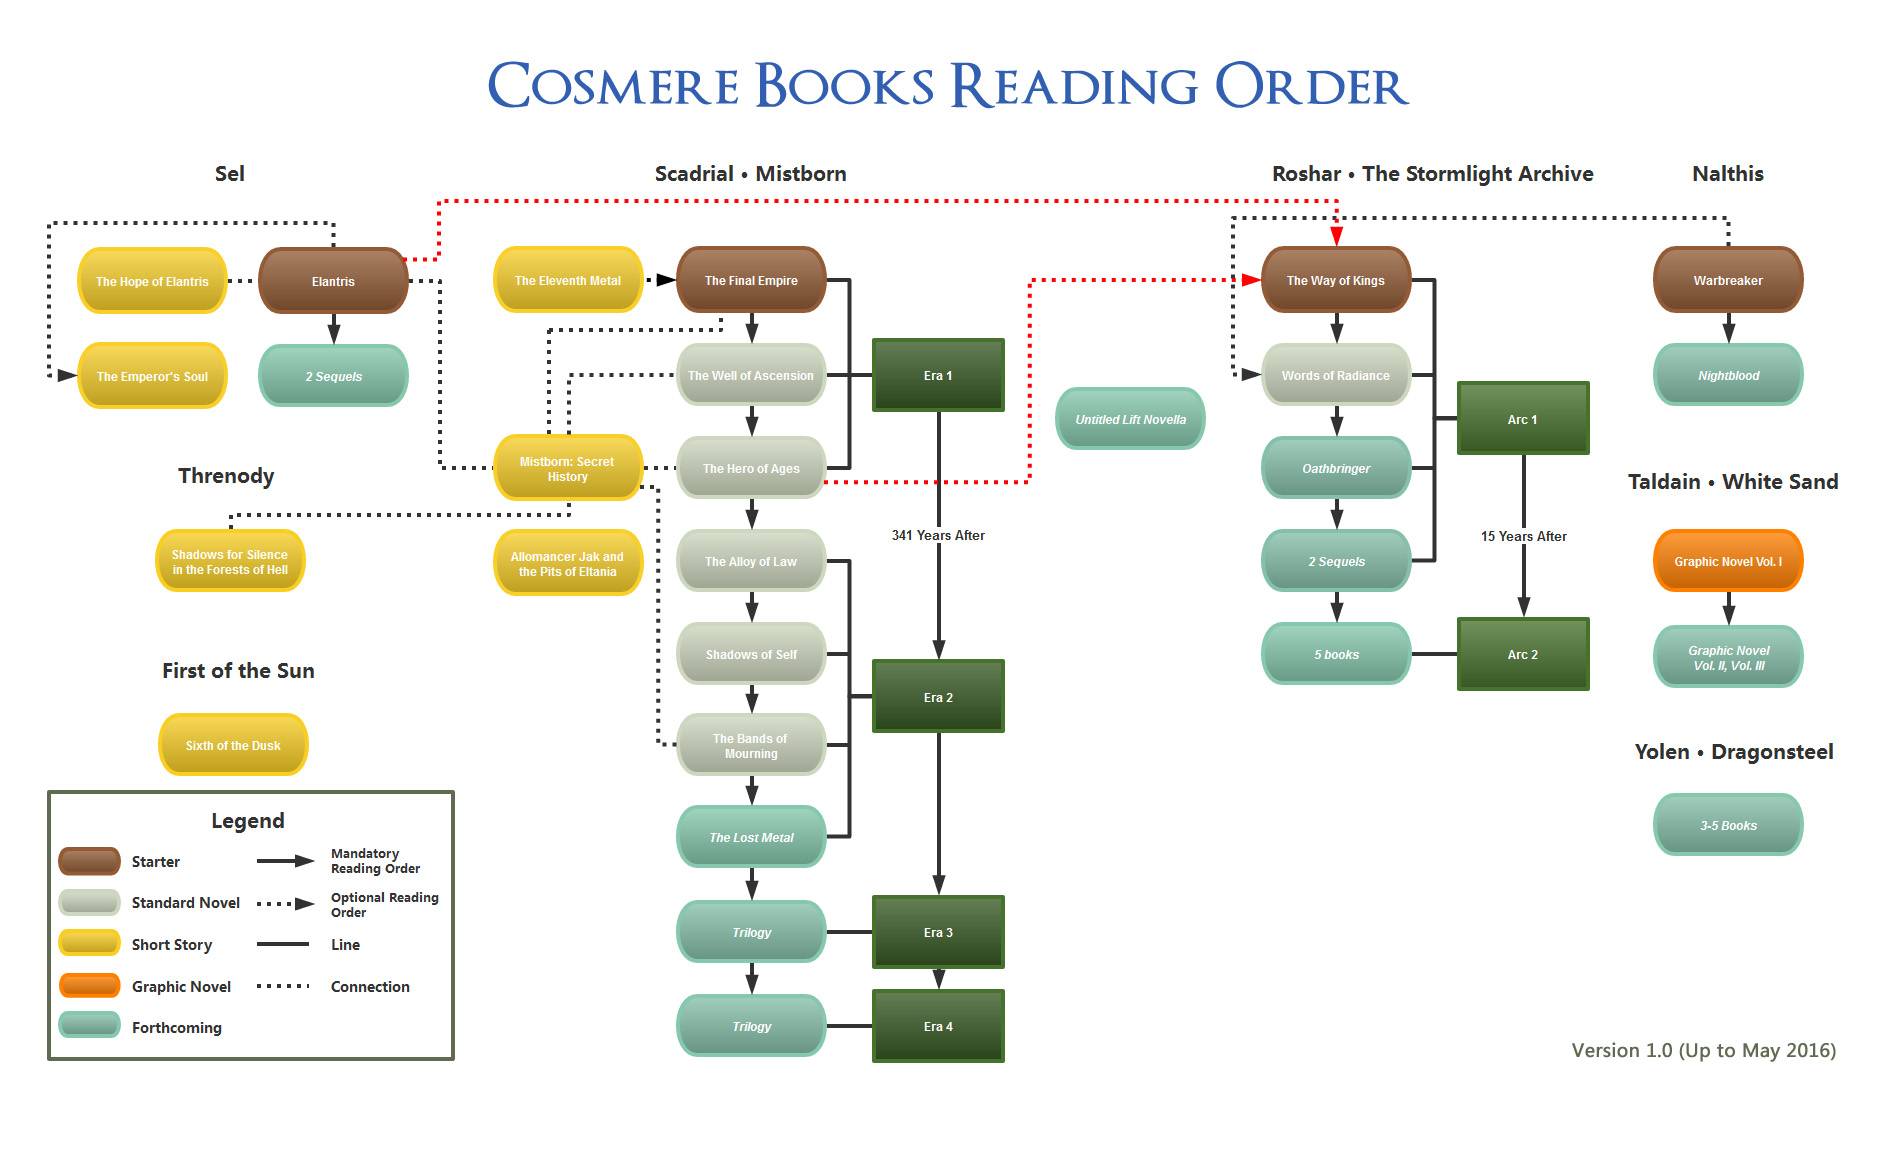 UPDATED CHART Cosmere Books Reading Order (Version 2.0 up to May 2016.